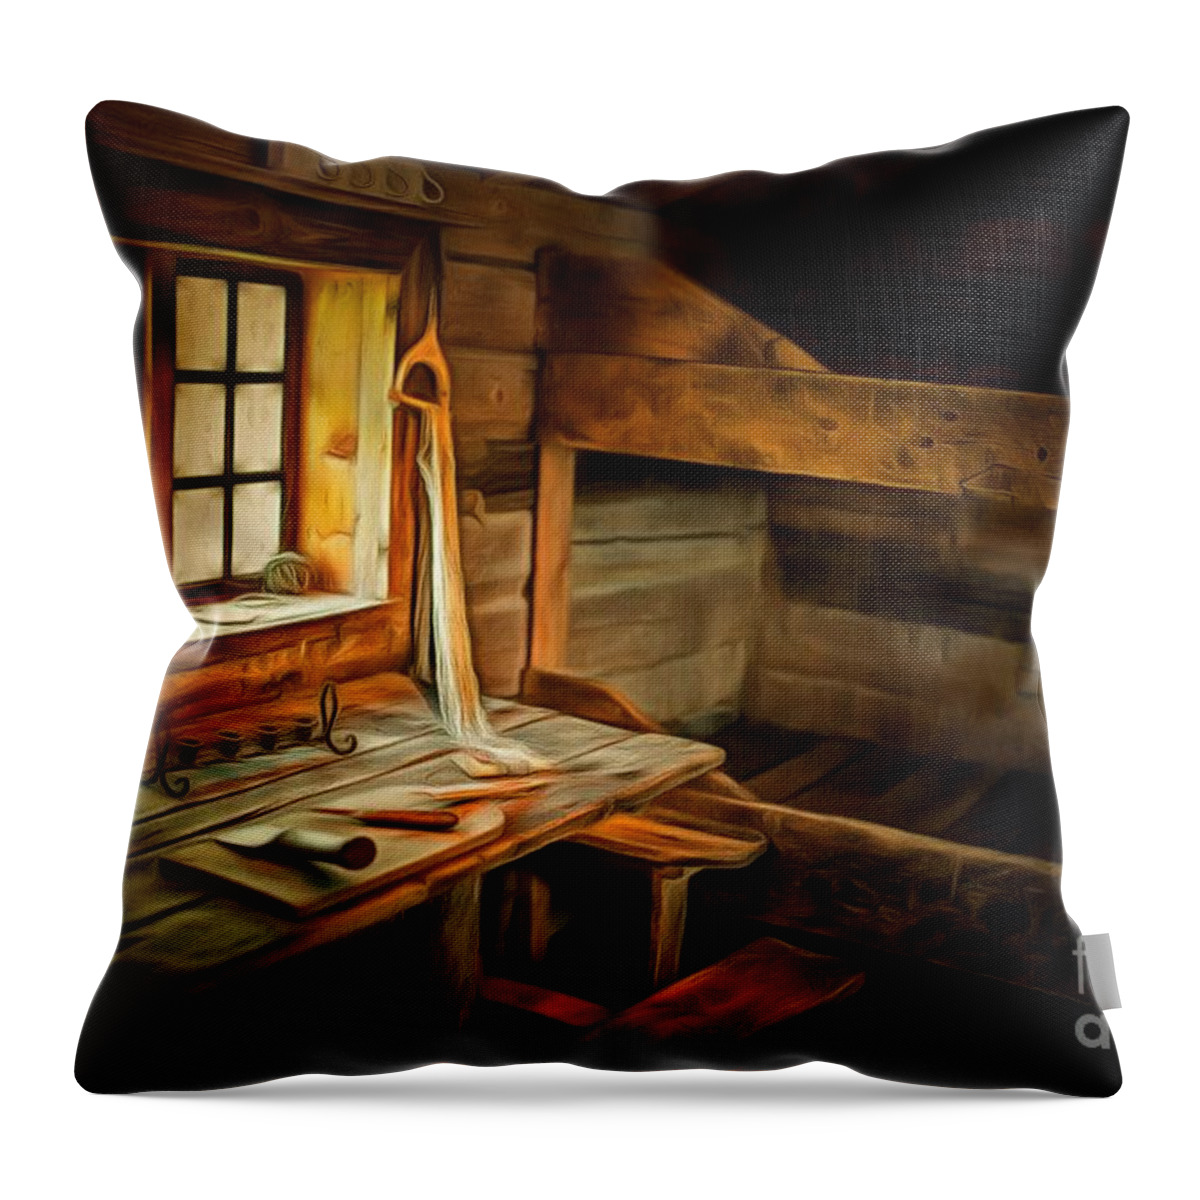 Simple Life Throw Pillow featuring the digital art Simple Life by Eva Lechner